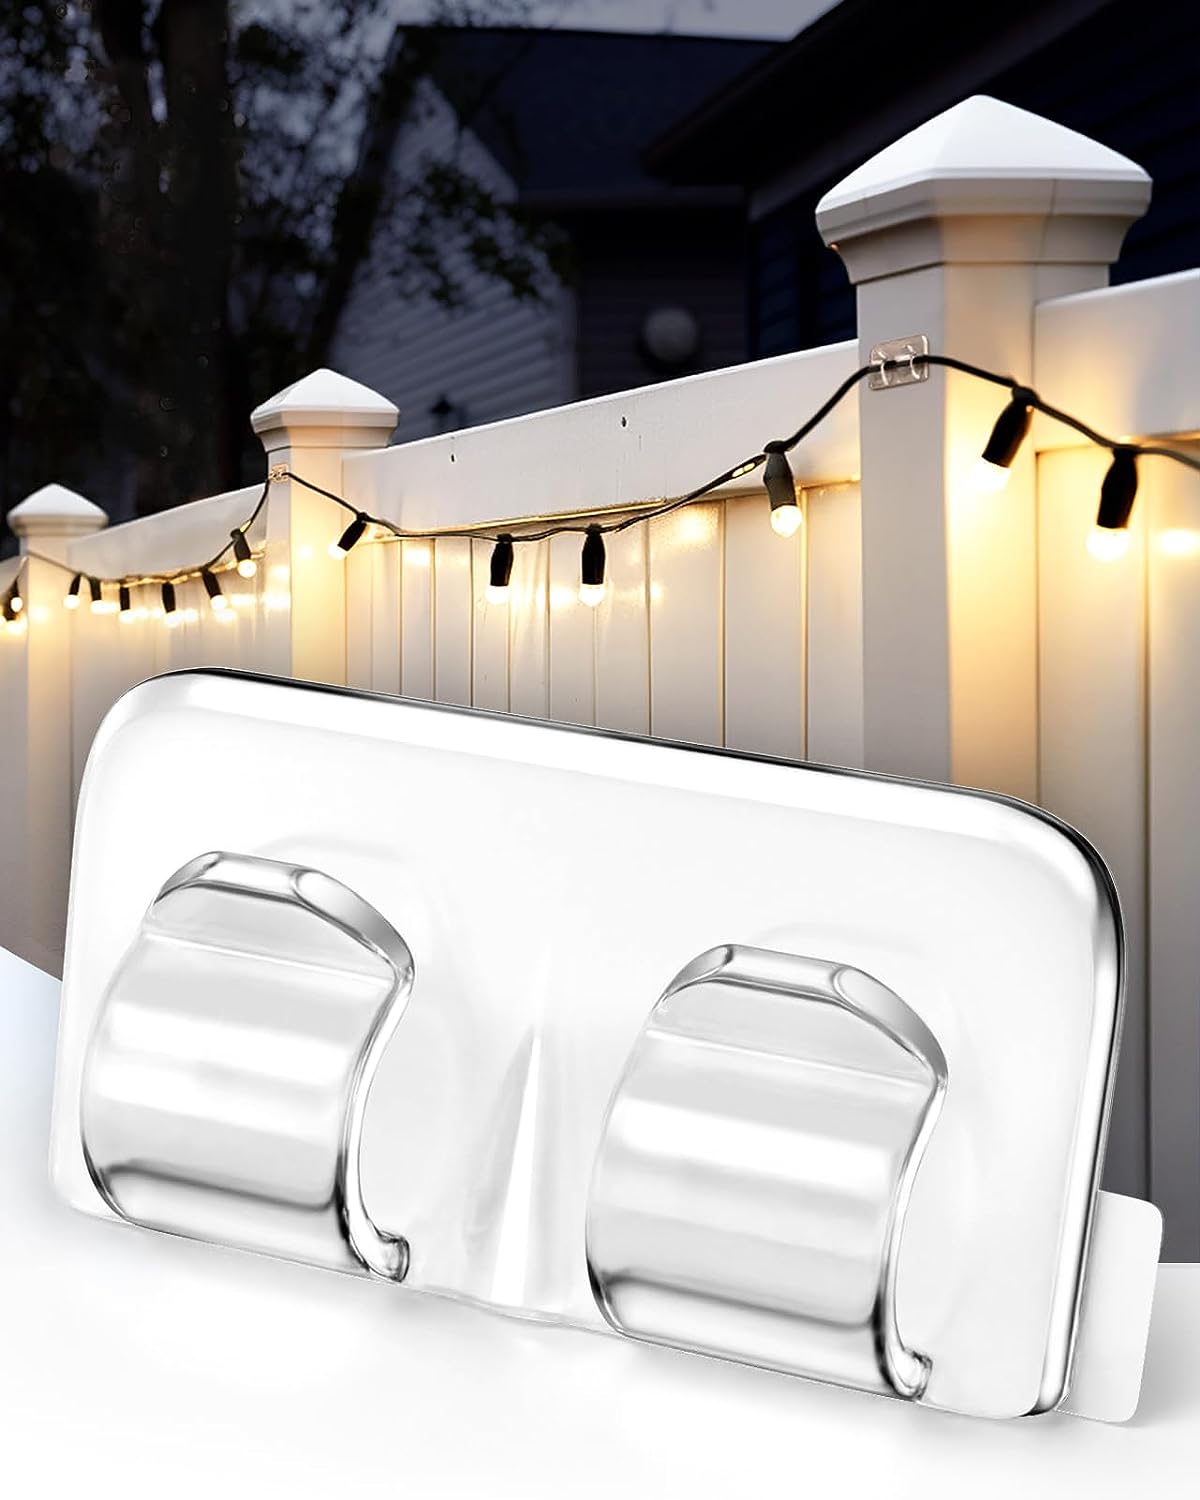 VENETIO Hooks for Outdoor String Lights Clips: 26Pcs Heavy Duty Light Hook with Waterproof Adhesive Strips - Outside Clear Cord Holders for Hanging Christmas Lighting – Outdoors Sticky Clip ➡ OD-00016